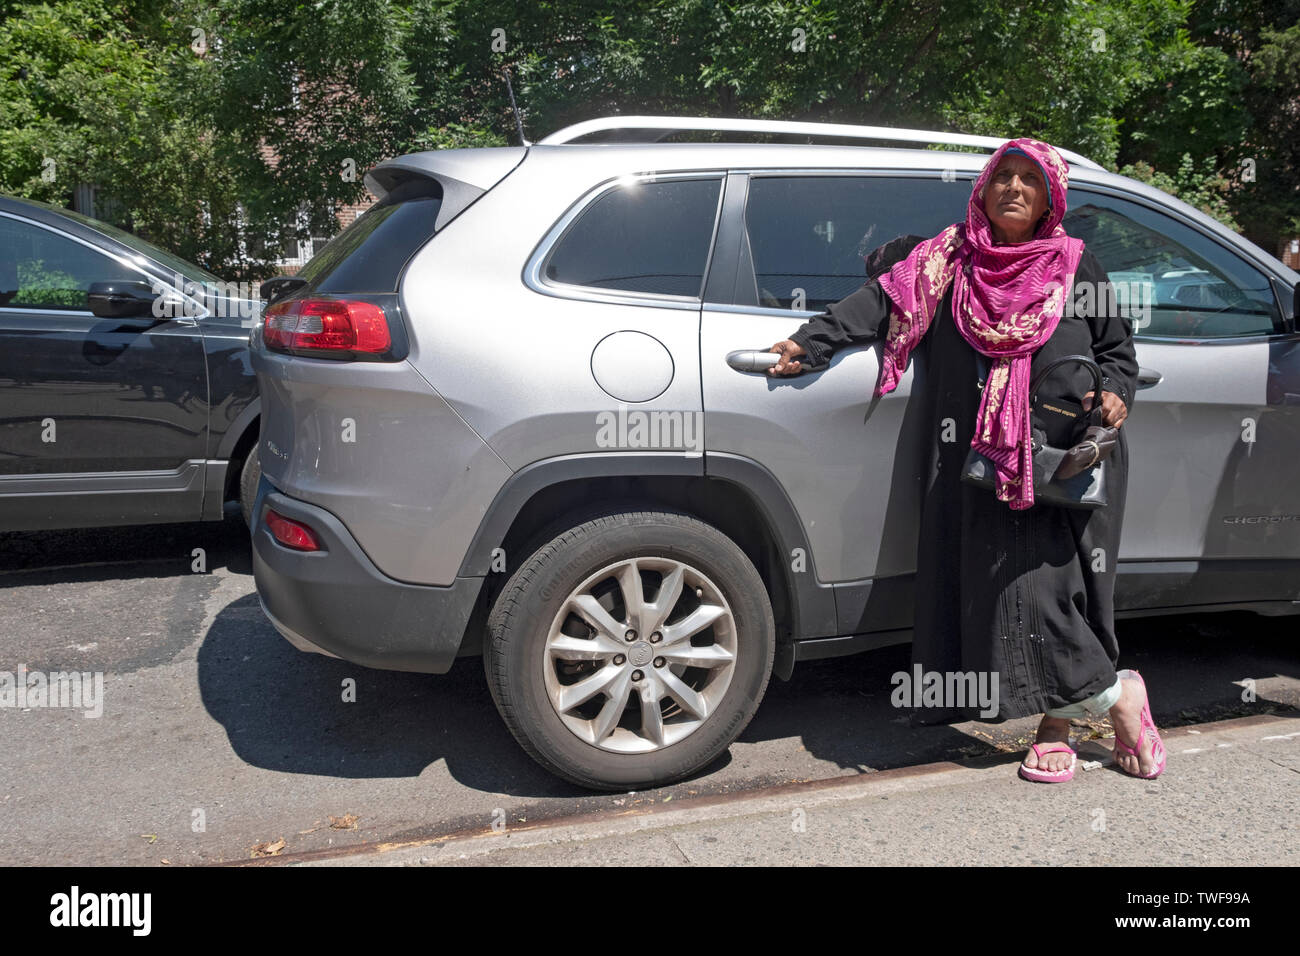 A Muslim woman in a hijab waits to pick up a child outside P.S. 69 in Jackson Heights, Queens, New York City. Stock Photo